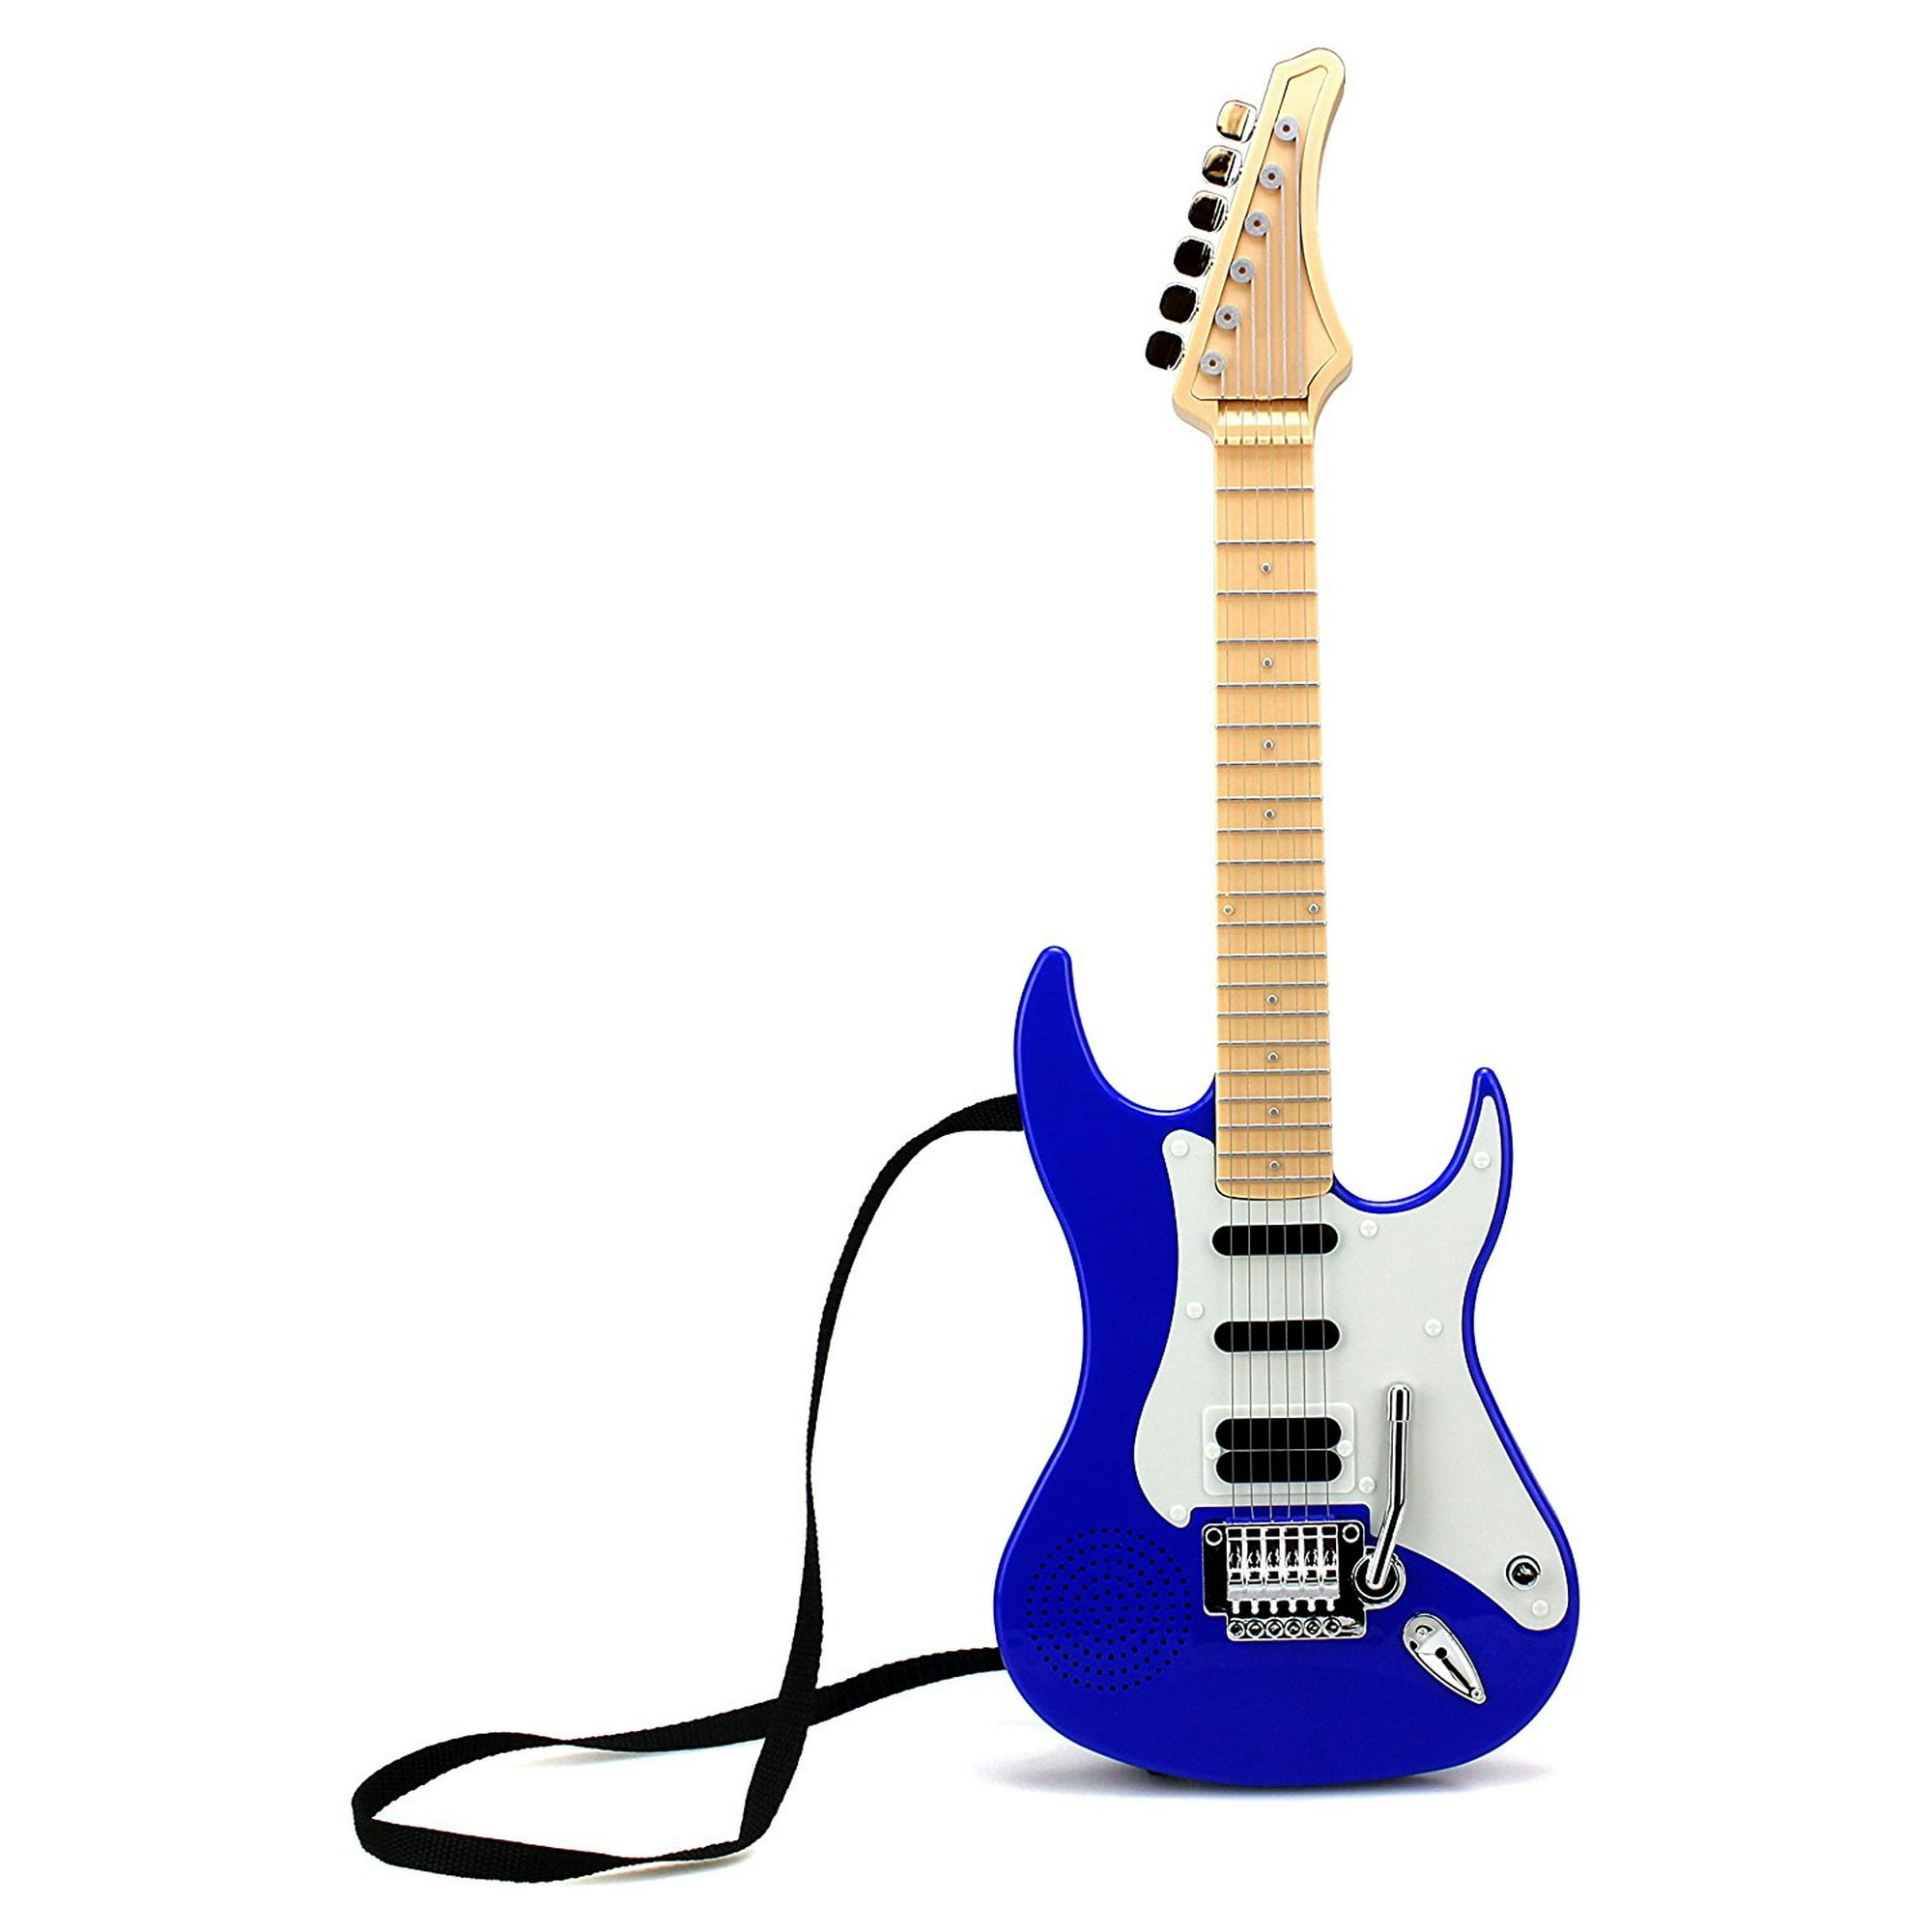 colorful electric guitar